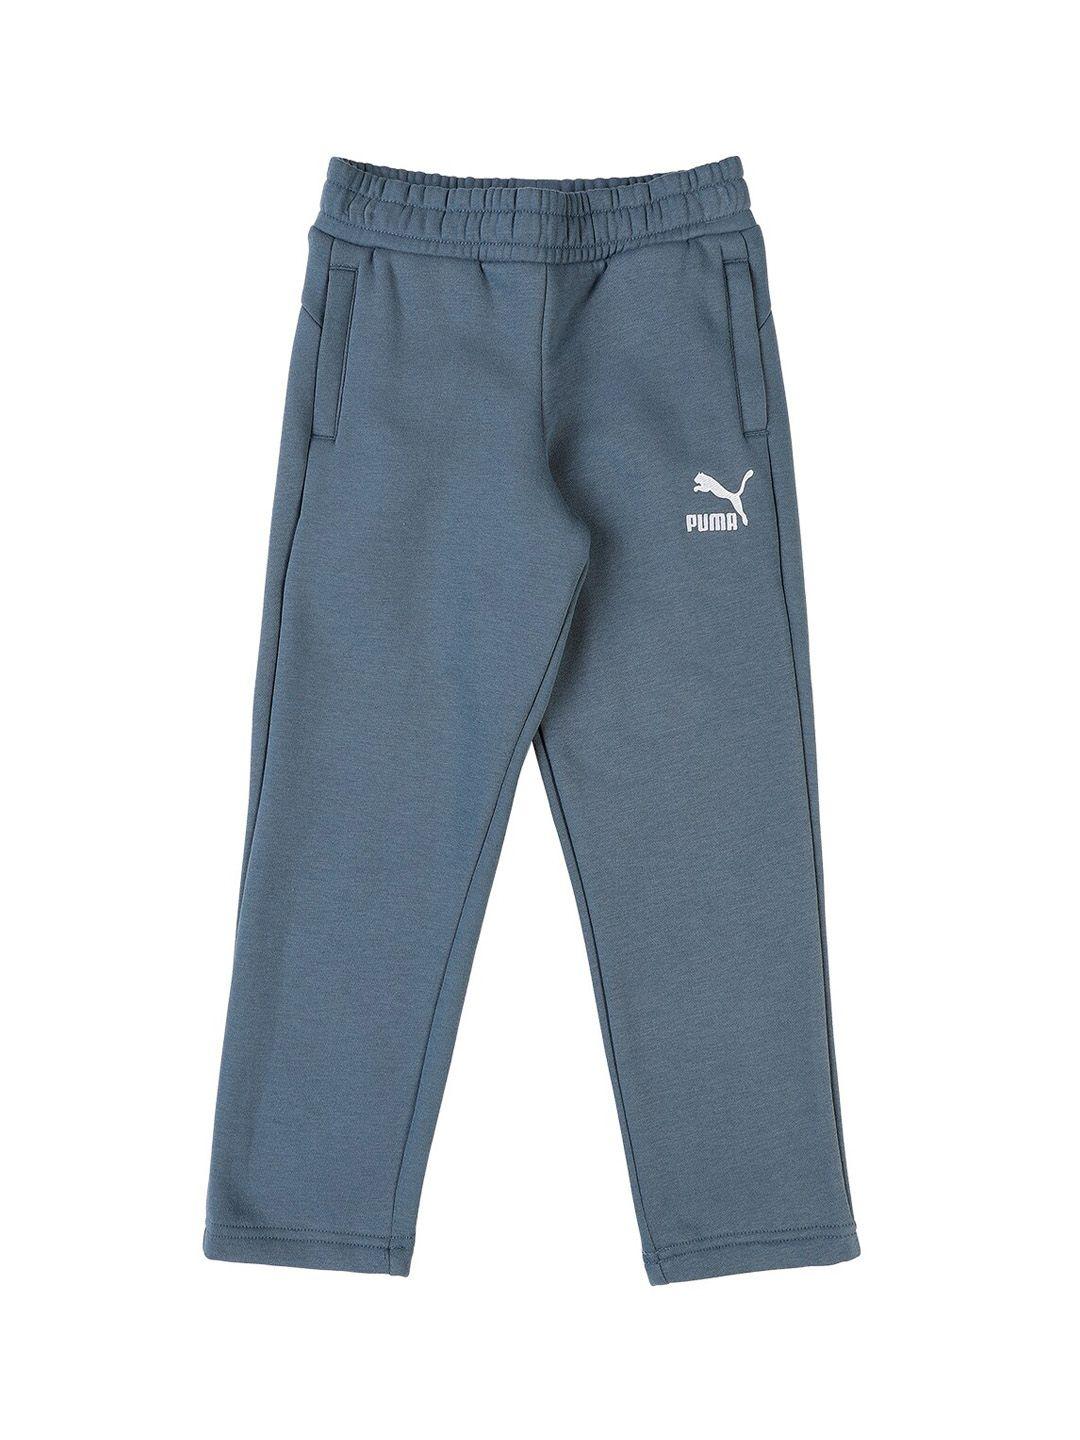 puma-boys-summer-squeeze-youth-track-pant